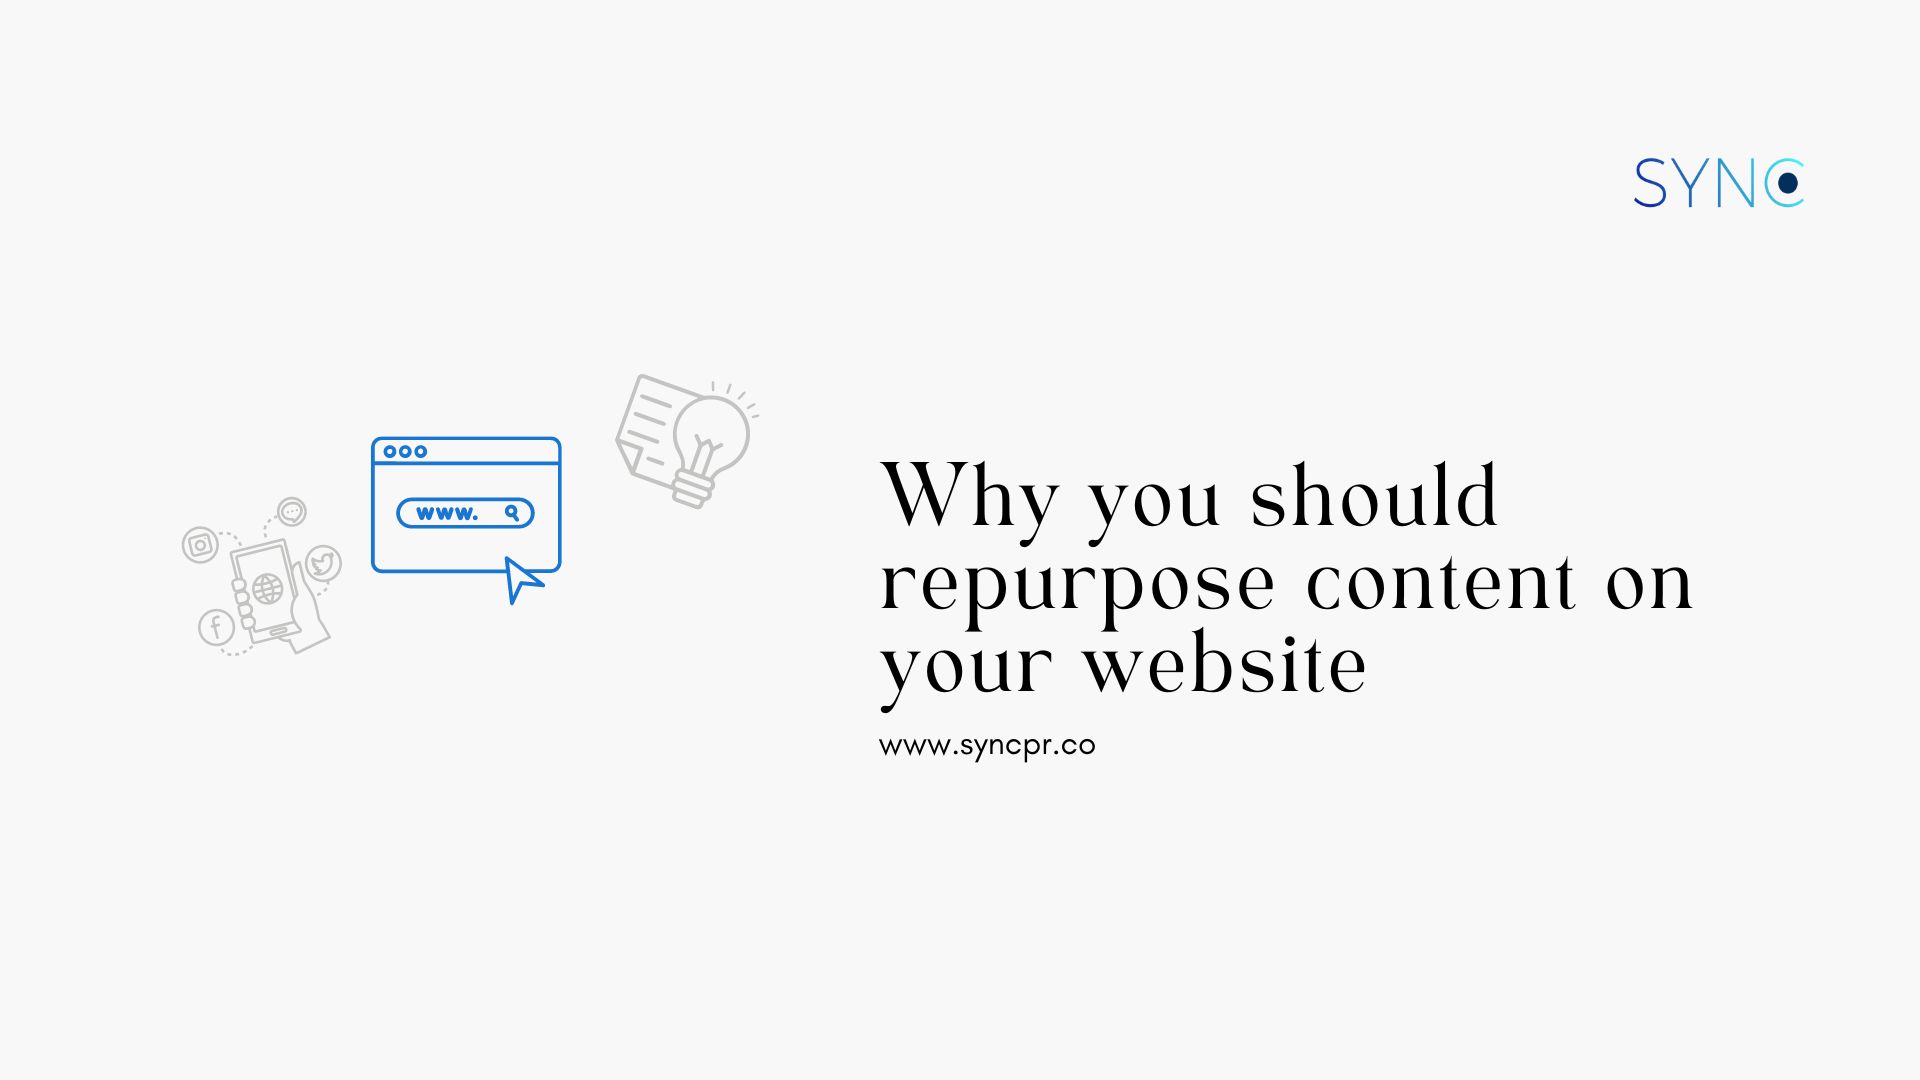 Why you should repurpose content on your website